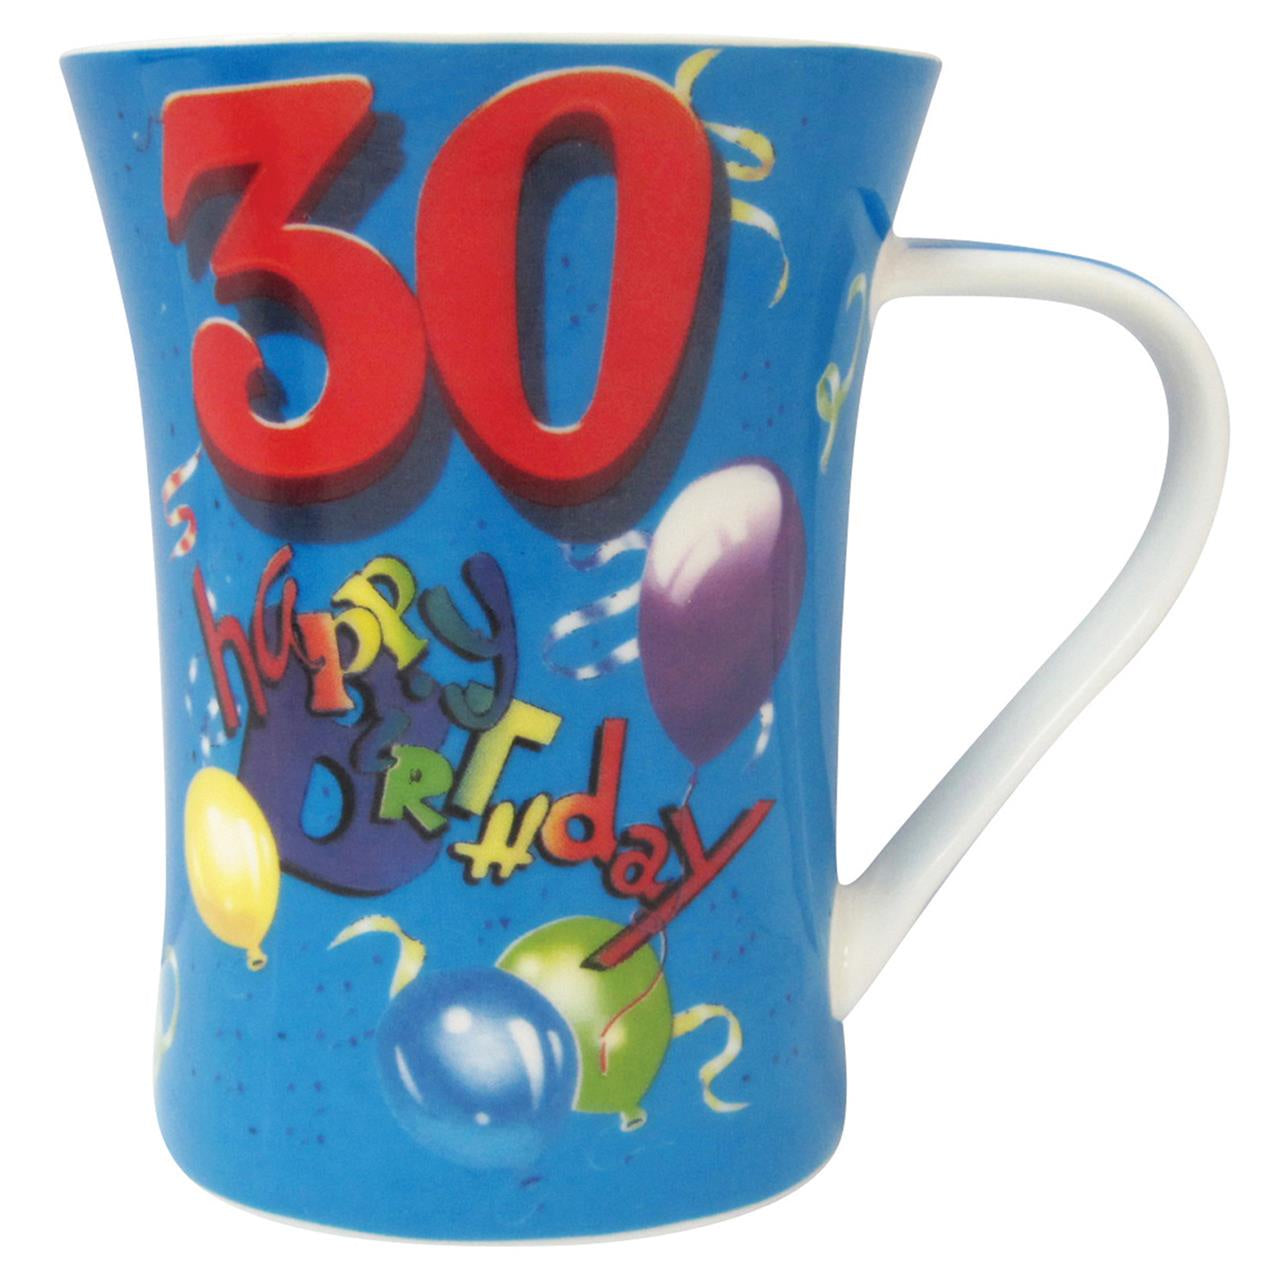 Party Mug Male - 30th Biscay